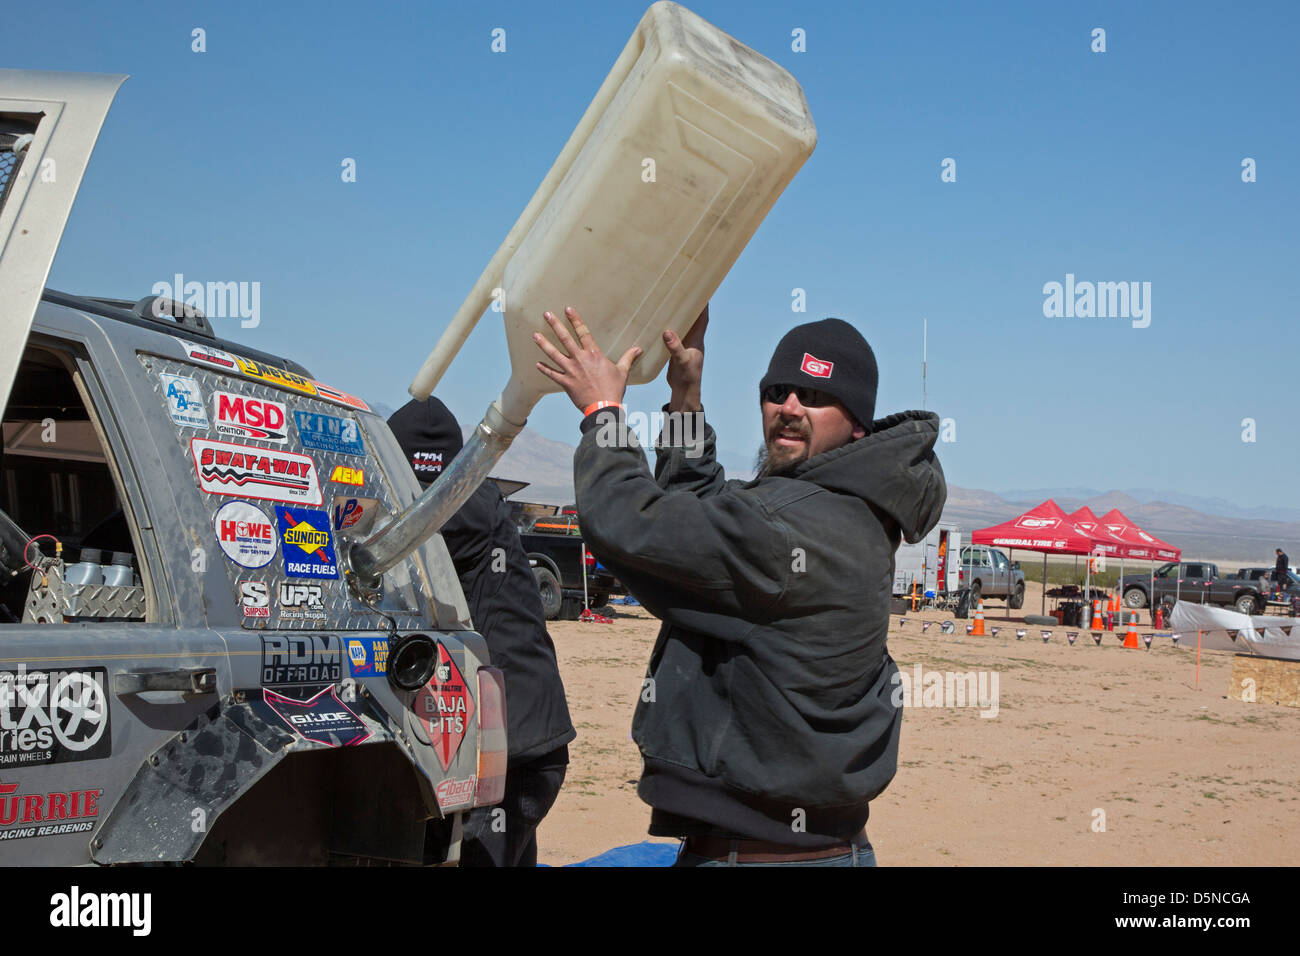 A crew members refuels a car in the pits during the Mint 400 off-road auto race through the Mojave Desert Stock Photo